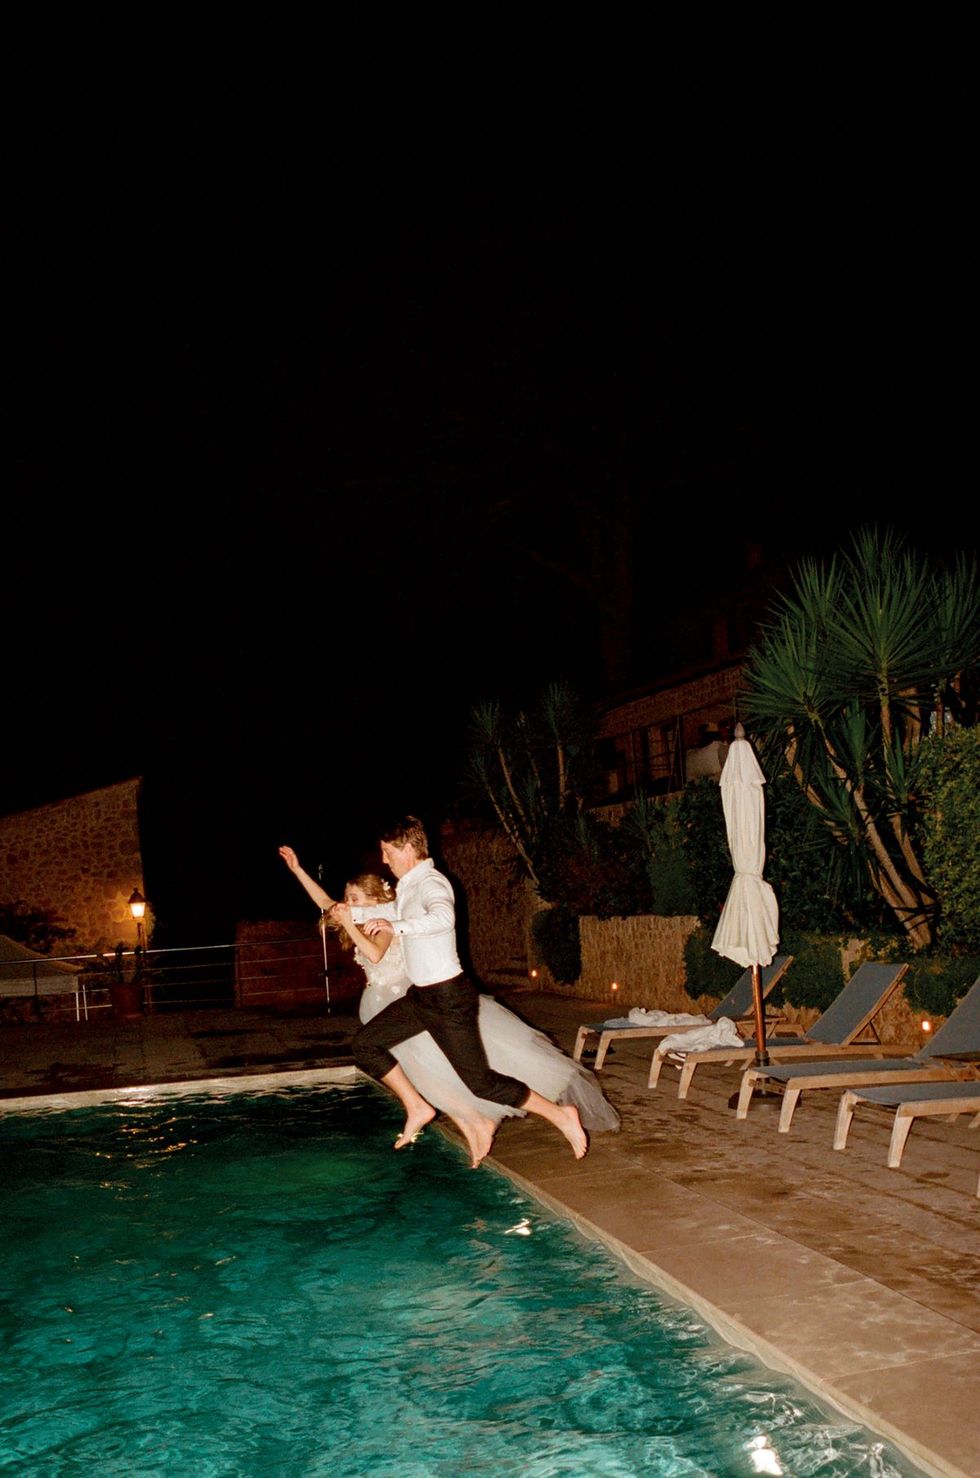 a man and woman dancing by a pool at night